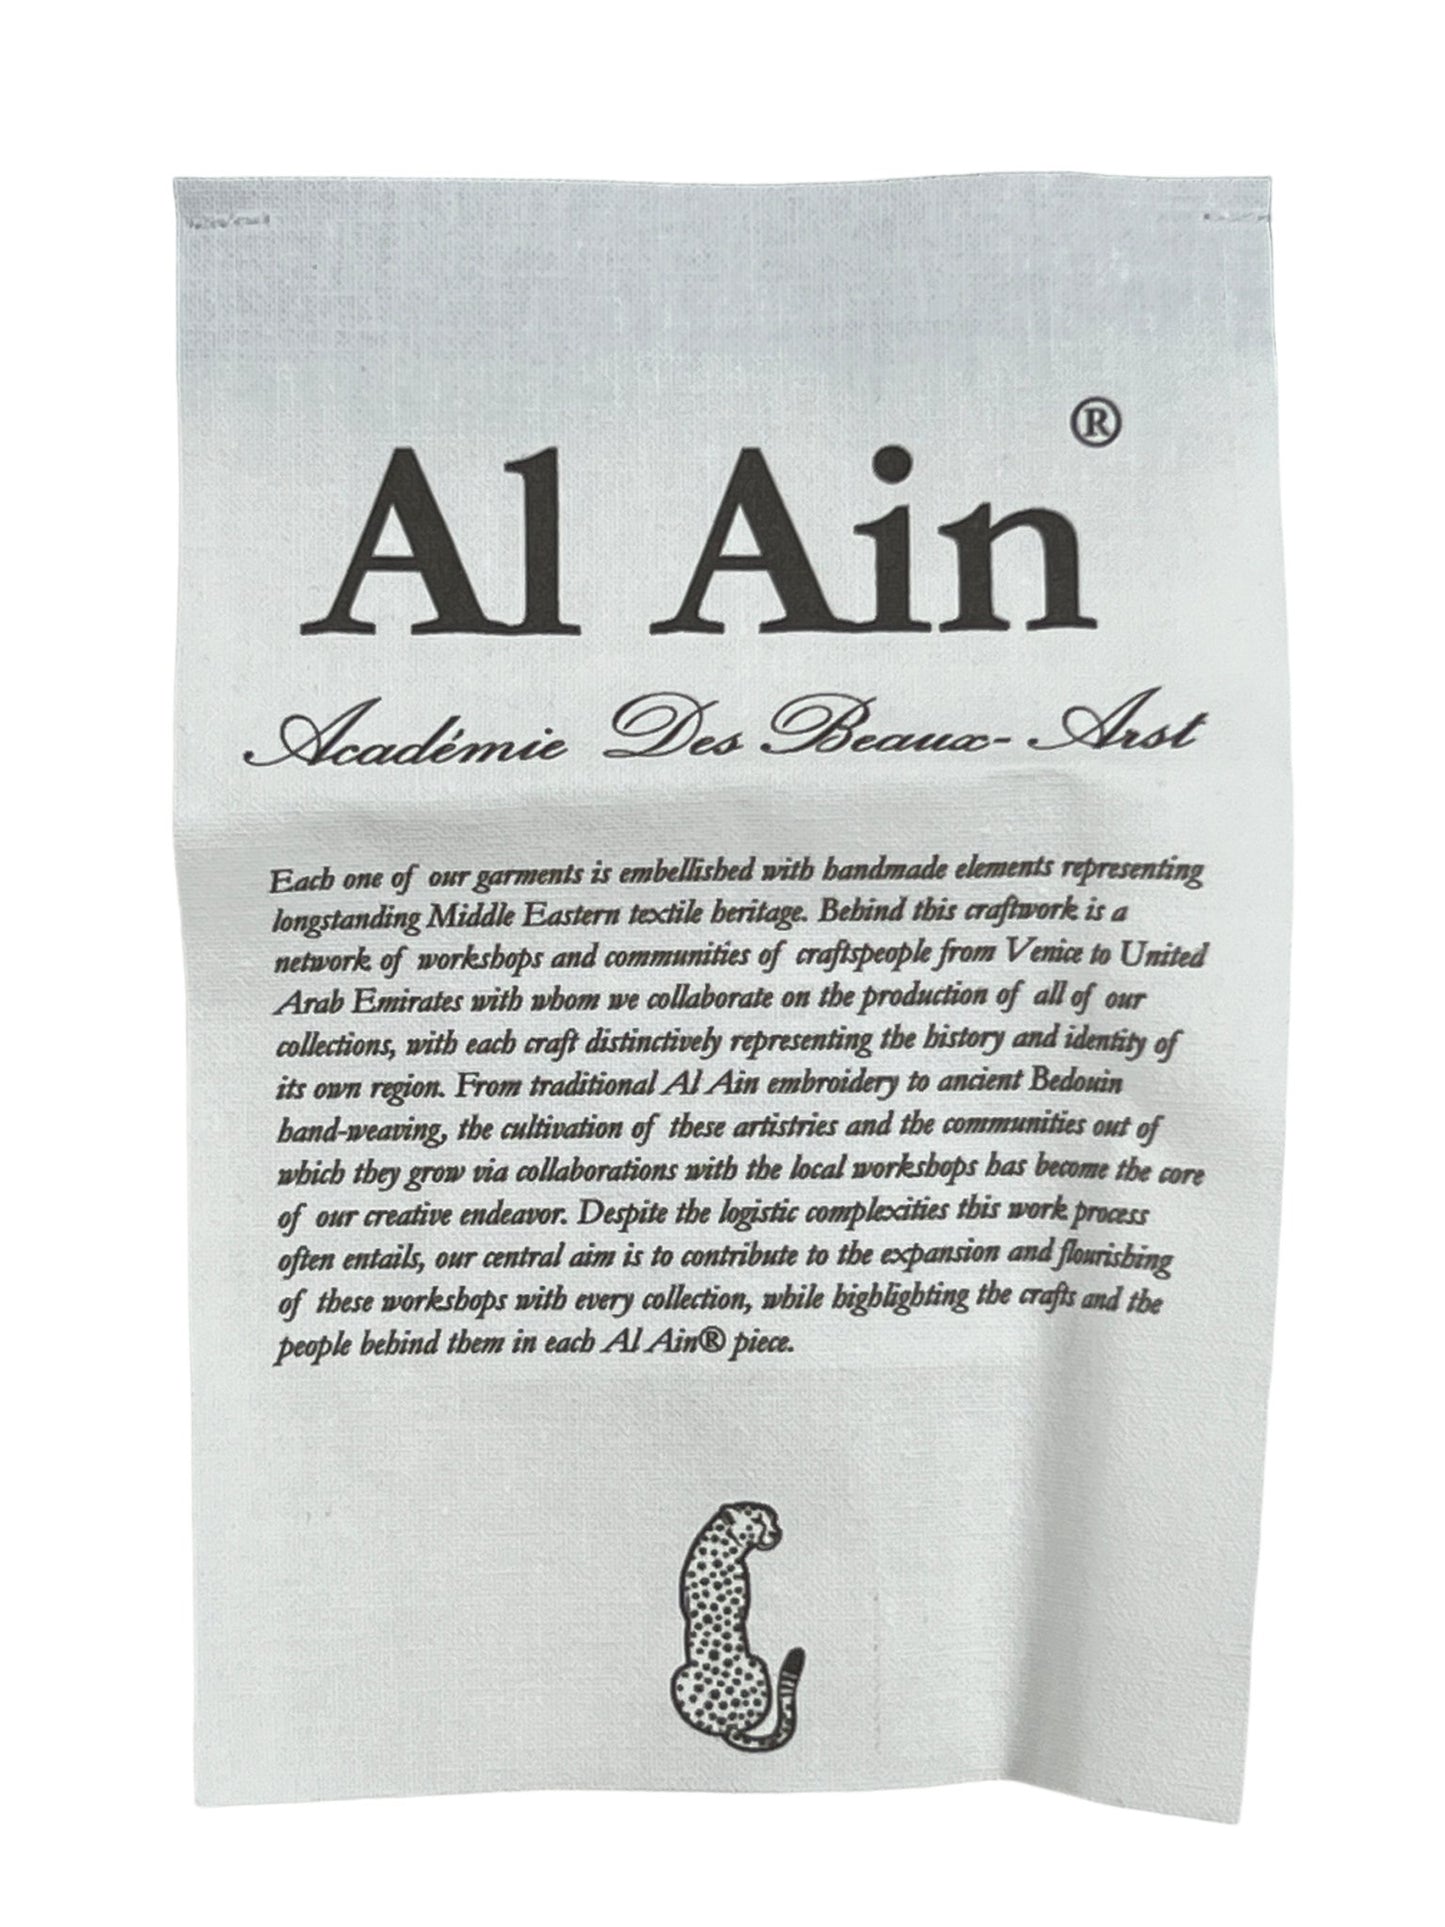 Label with "Al Ain" and "Académie Des Beaux-Arts" at the top, followed by a detailed description of the brand's craftsmanship and cultural significance, including its grey AL AIN AHOX S150 YACHT LIMITED with thick rope texture lace detail. The label features a small illustration of a leopard at the bottom.